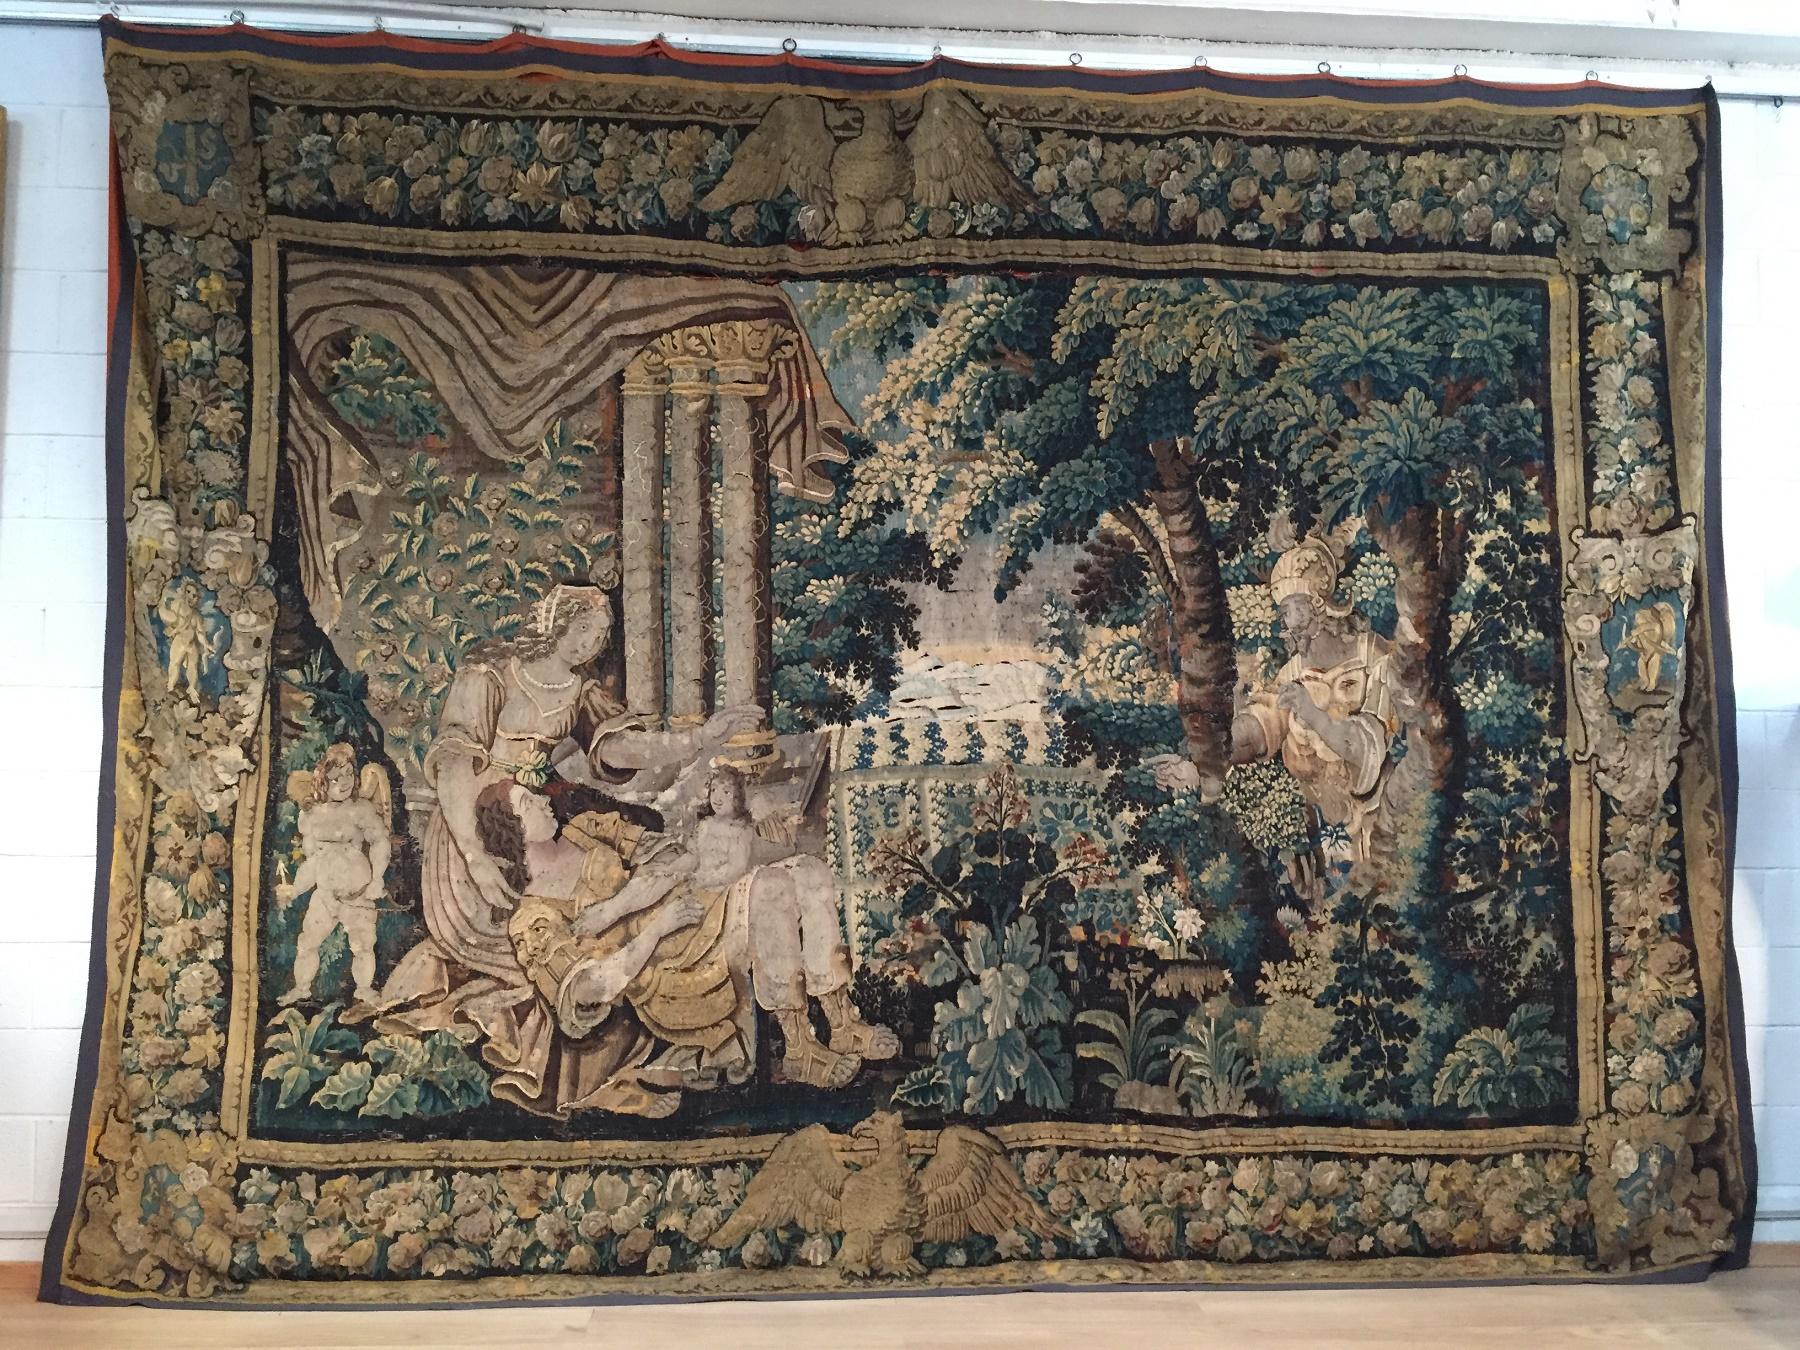 16th century, Flemish storied wood tapestry
Flanders Brussels

The beautiful and precious tapestry, of fine workmanship and made with wool yarns, was made in the 16th century in Flanders. It presents stylistically close to the works produced by